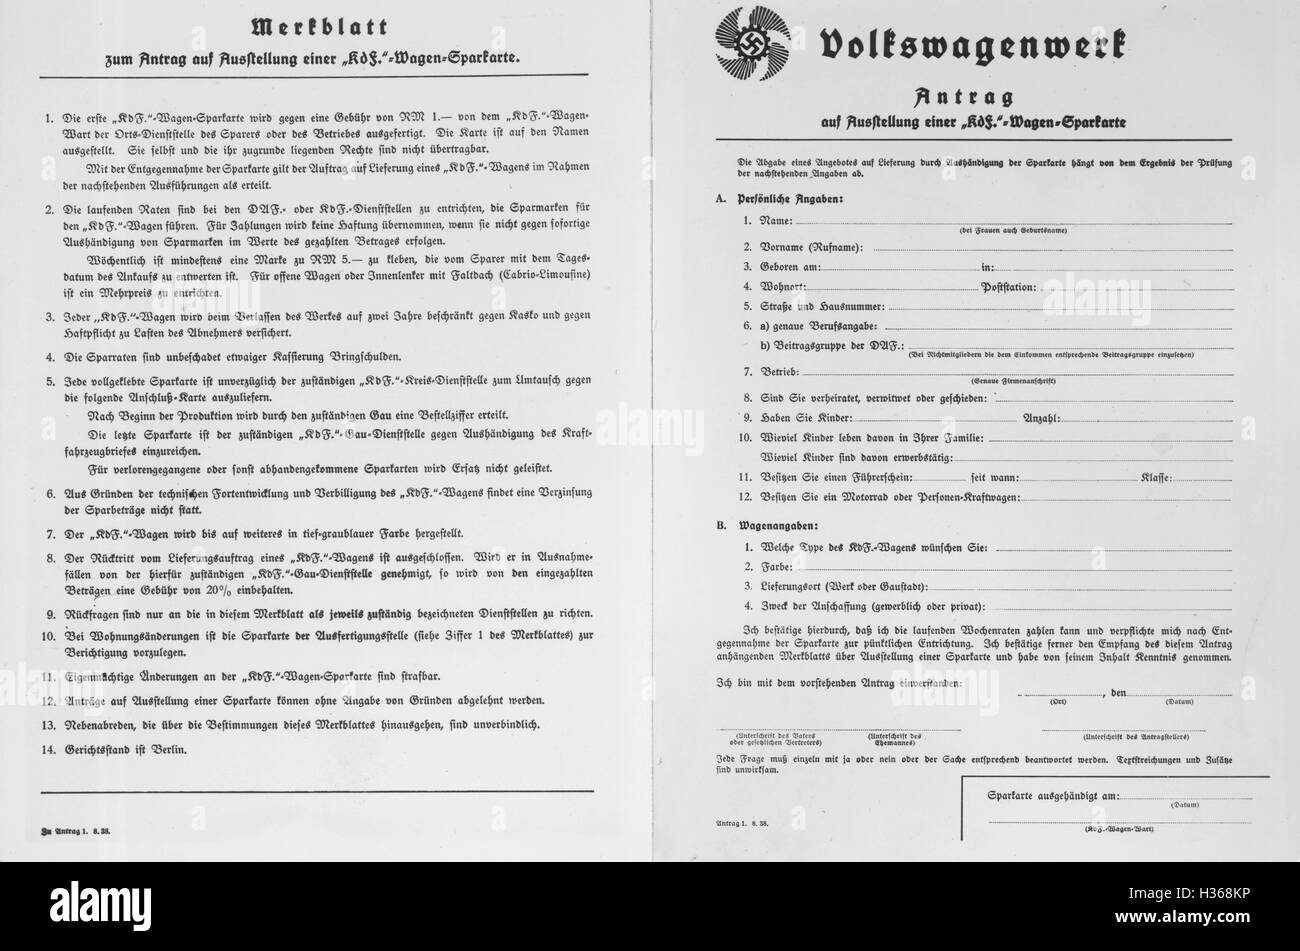 Application form for a KdF-Wagen, 1938 Stock Photo